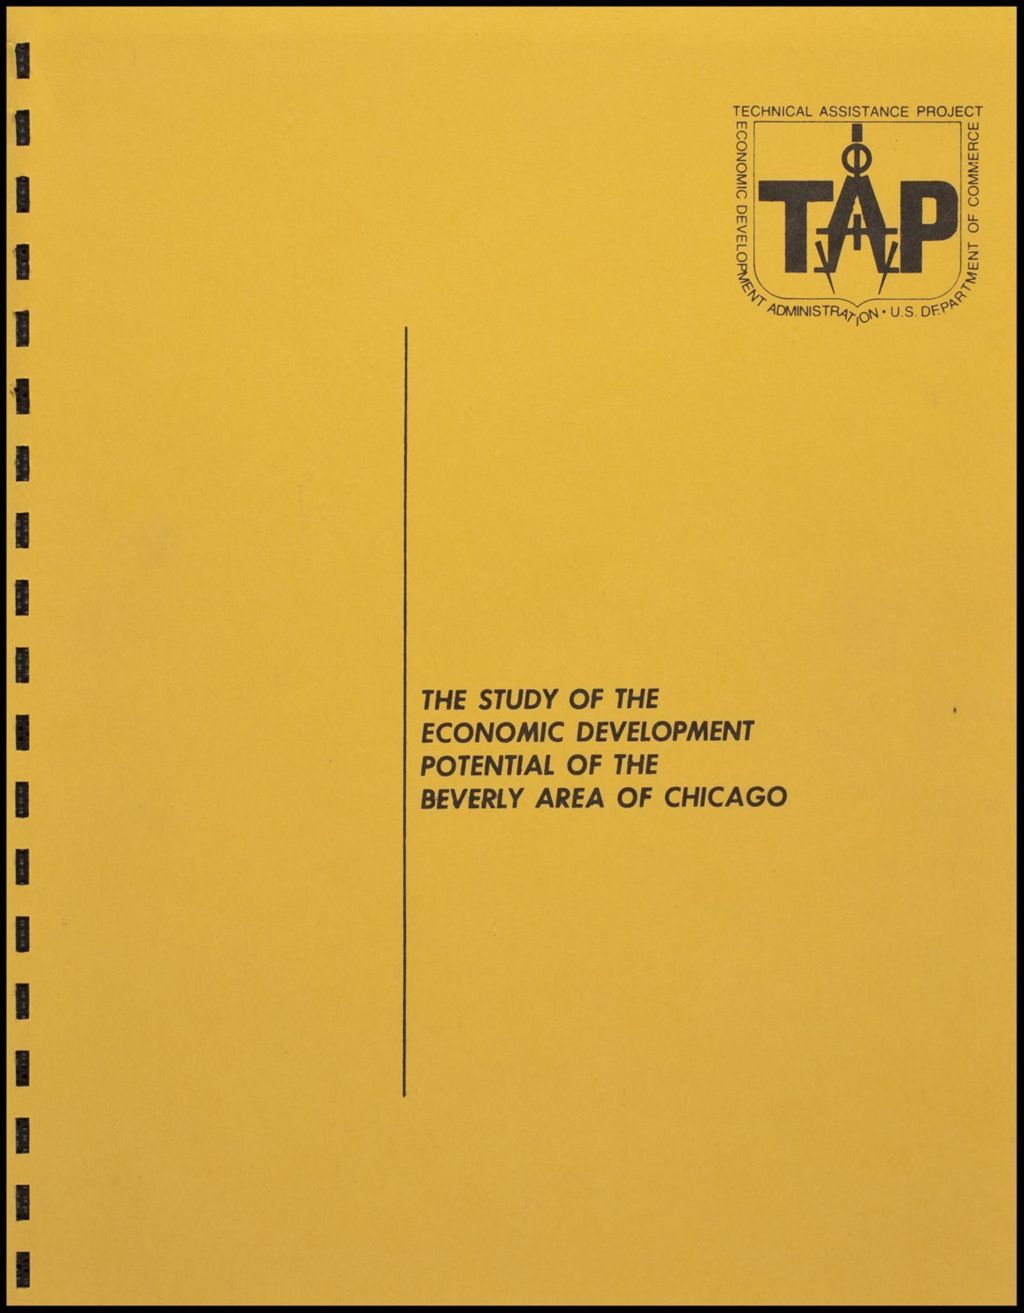 Miniature of Publications - 'The Study of the Economic Development Potential of the Beverly Area of Chicago' (Folder 165)